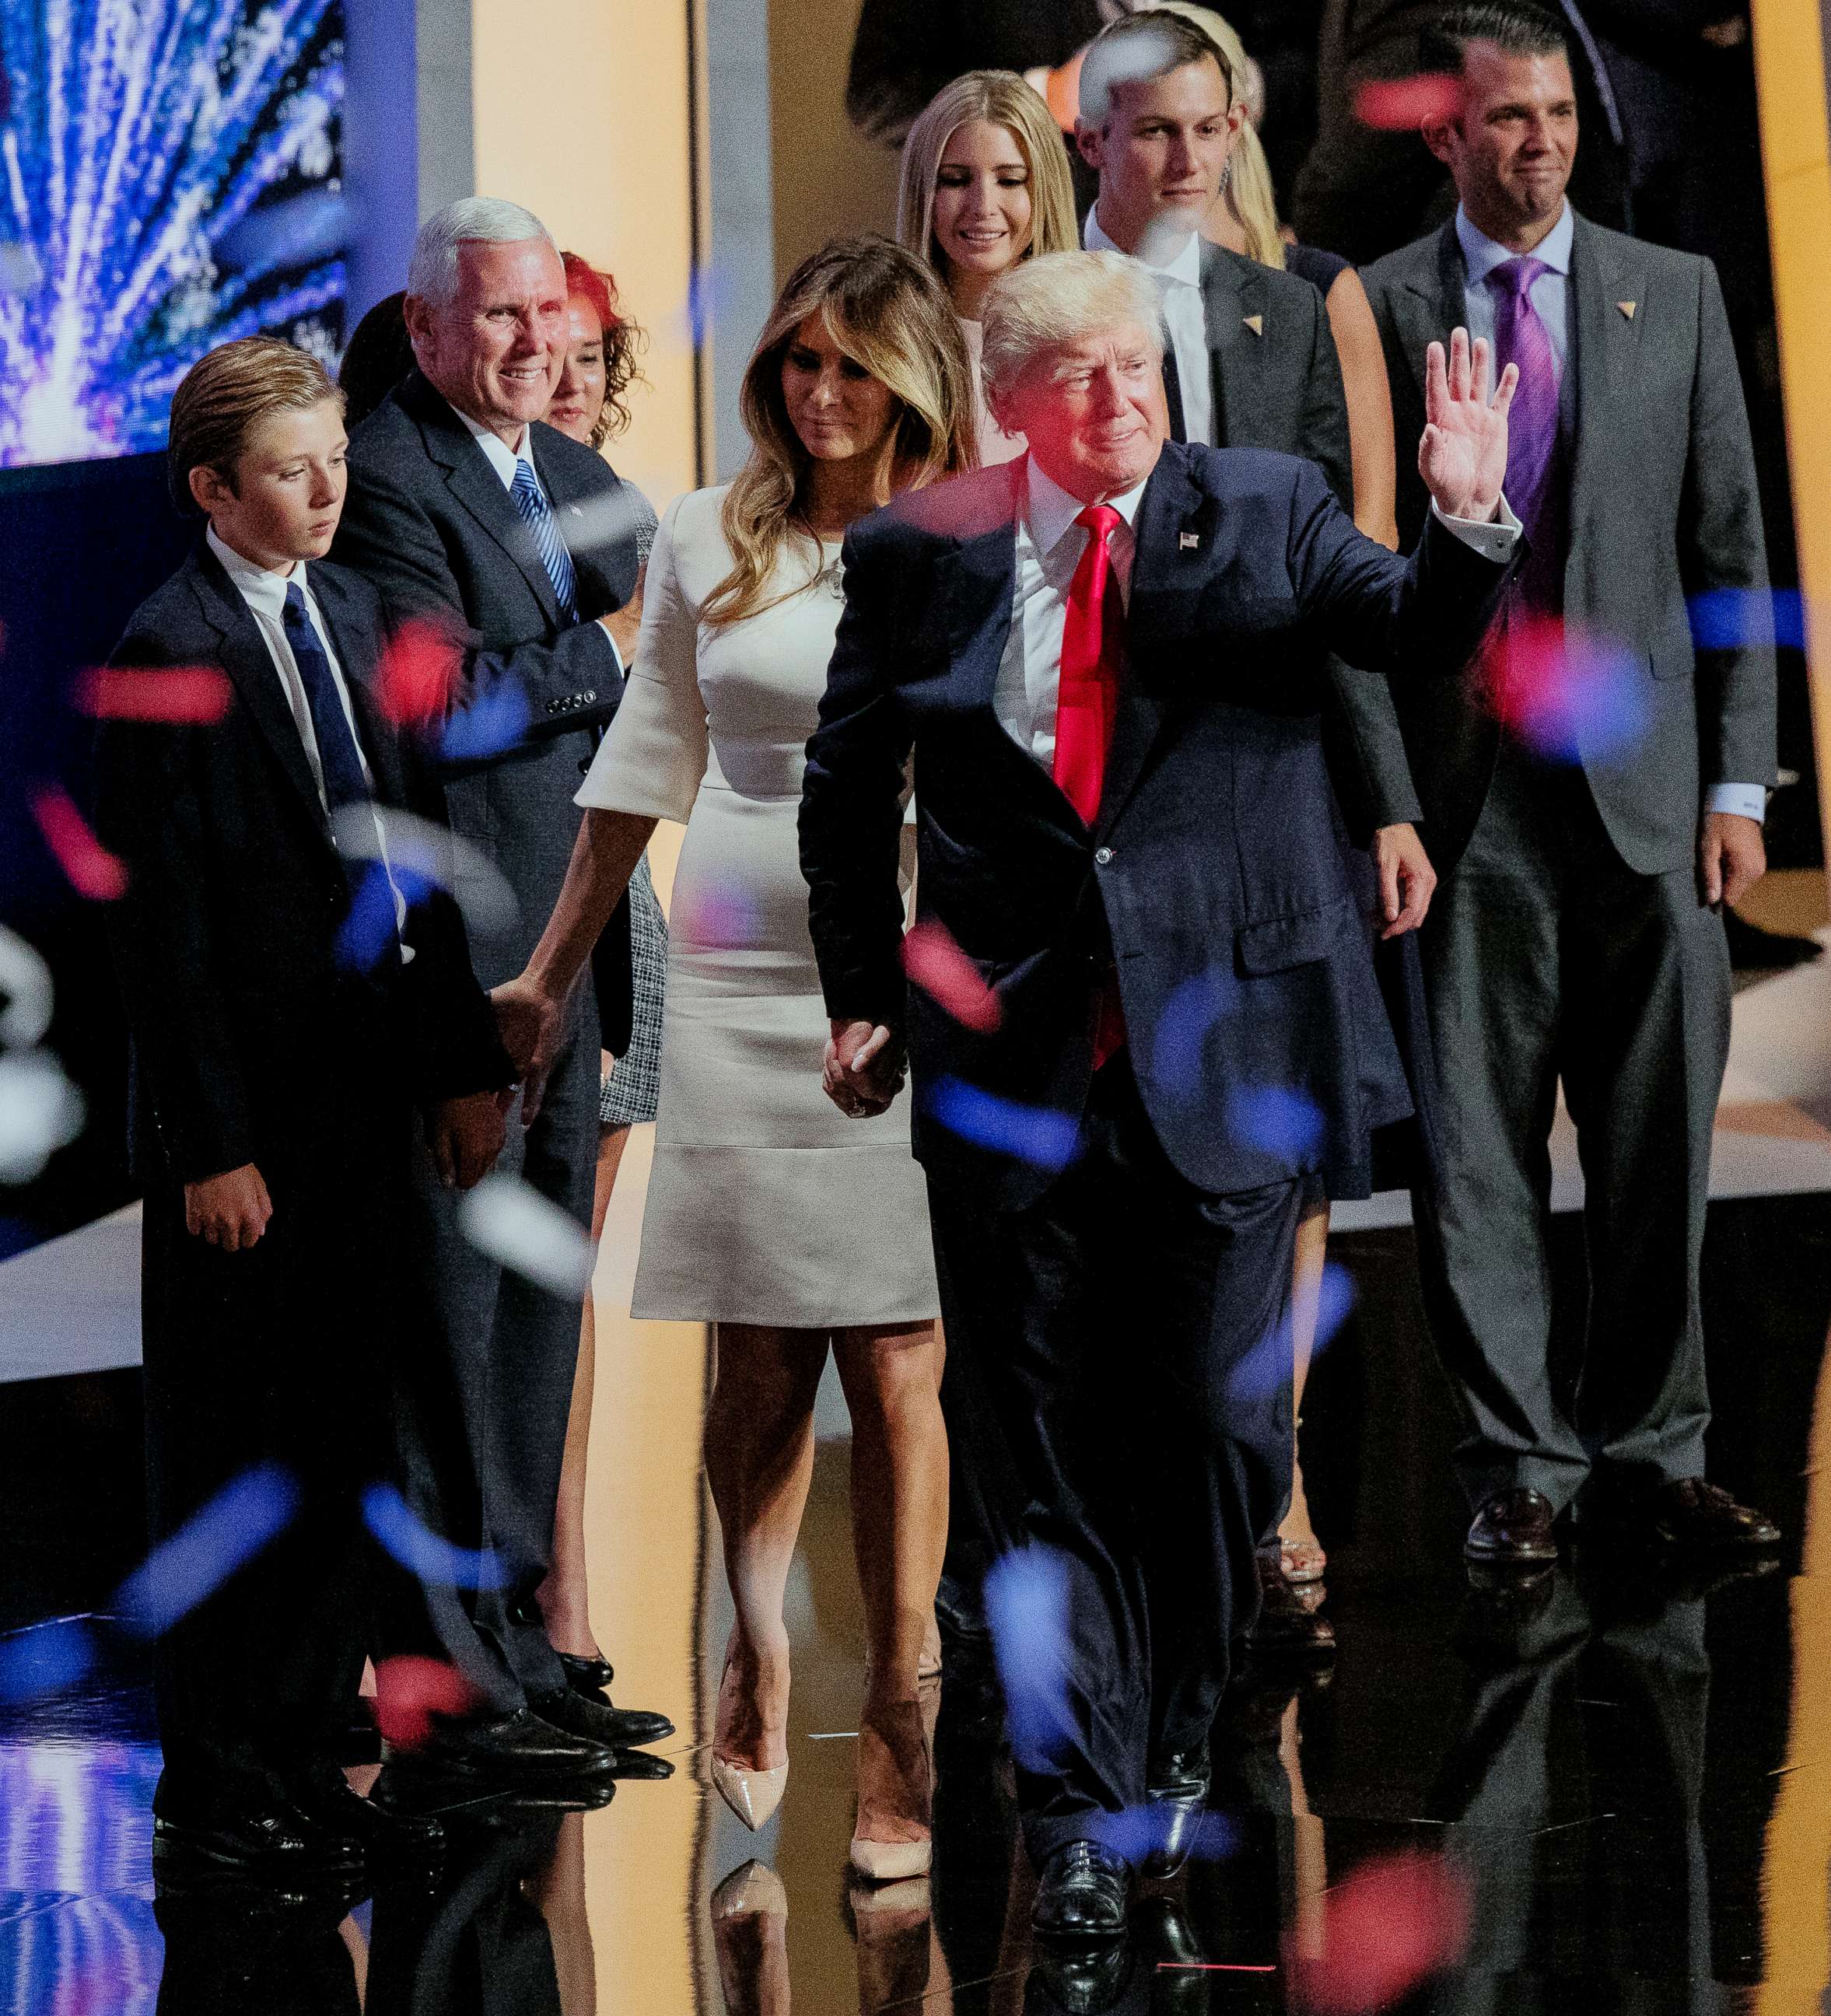 PHOTO: Presidential candidate Donald Trump, Melania Trump, and family take the stage during the Republican National Convention in Cleveland, Ohio, July 21, 2016.